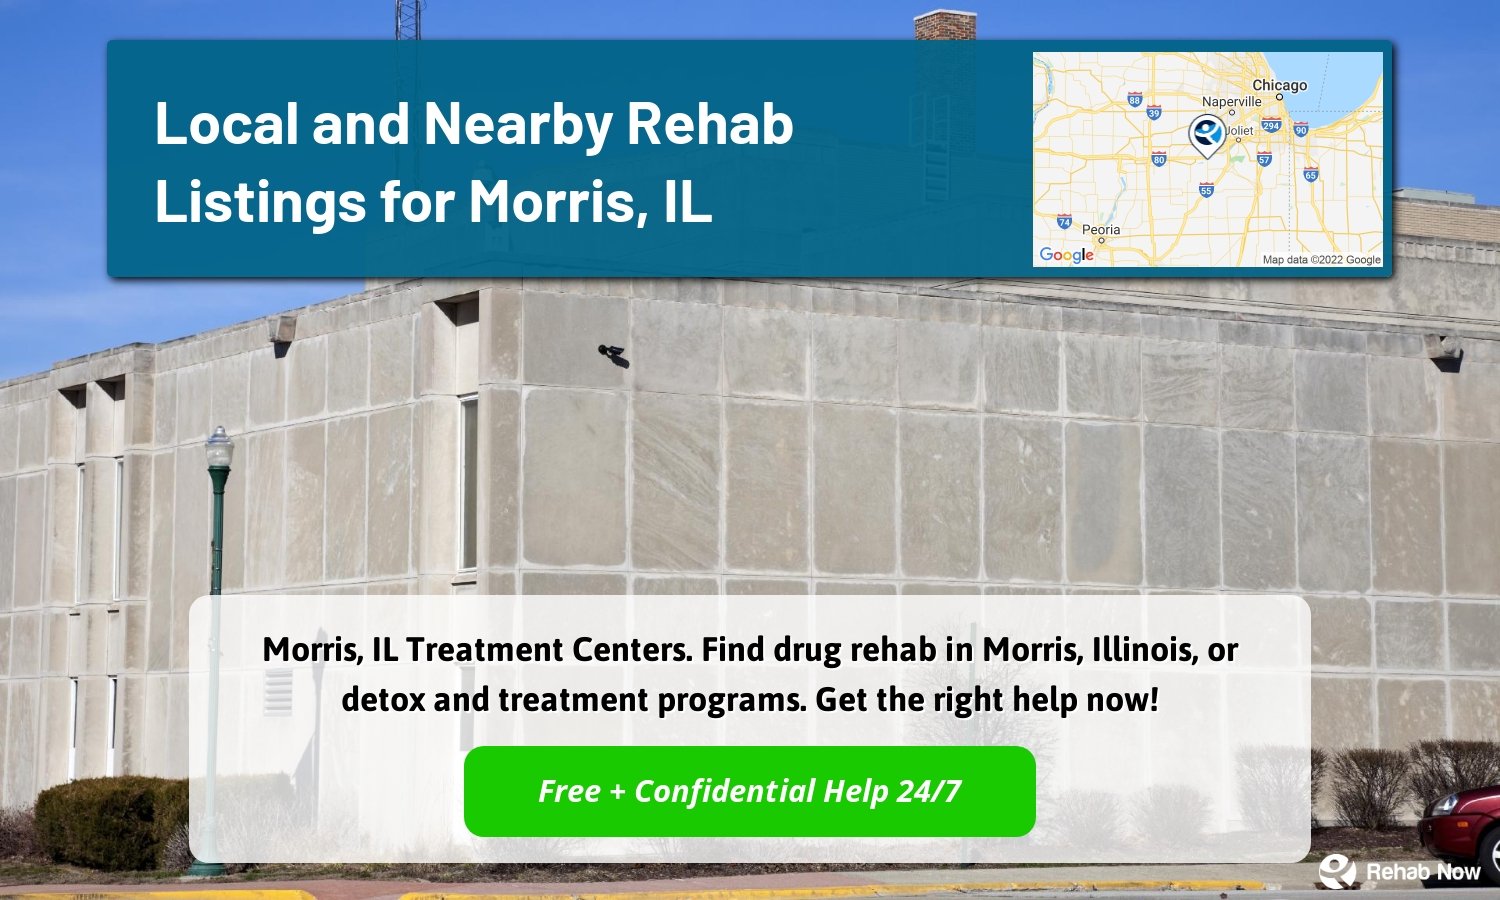 Morris, IL Treatment Centers. Find drug rehab in Morris, Illinois, or detox and treatment programs. Get the right help now!